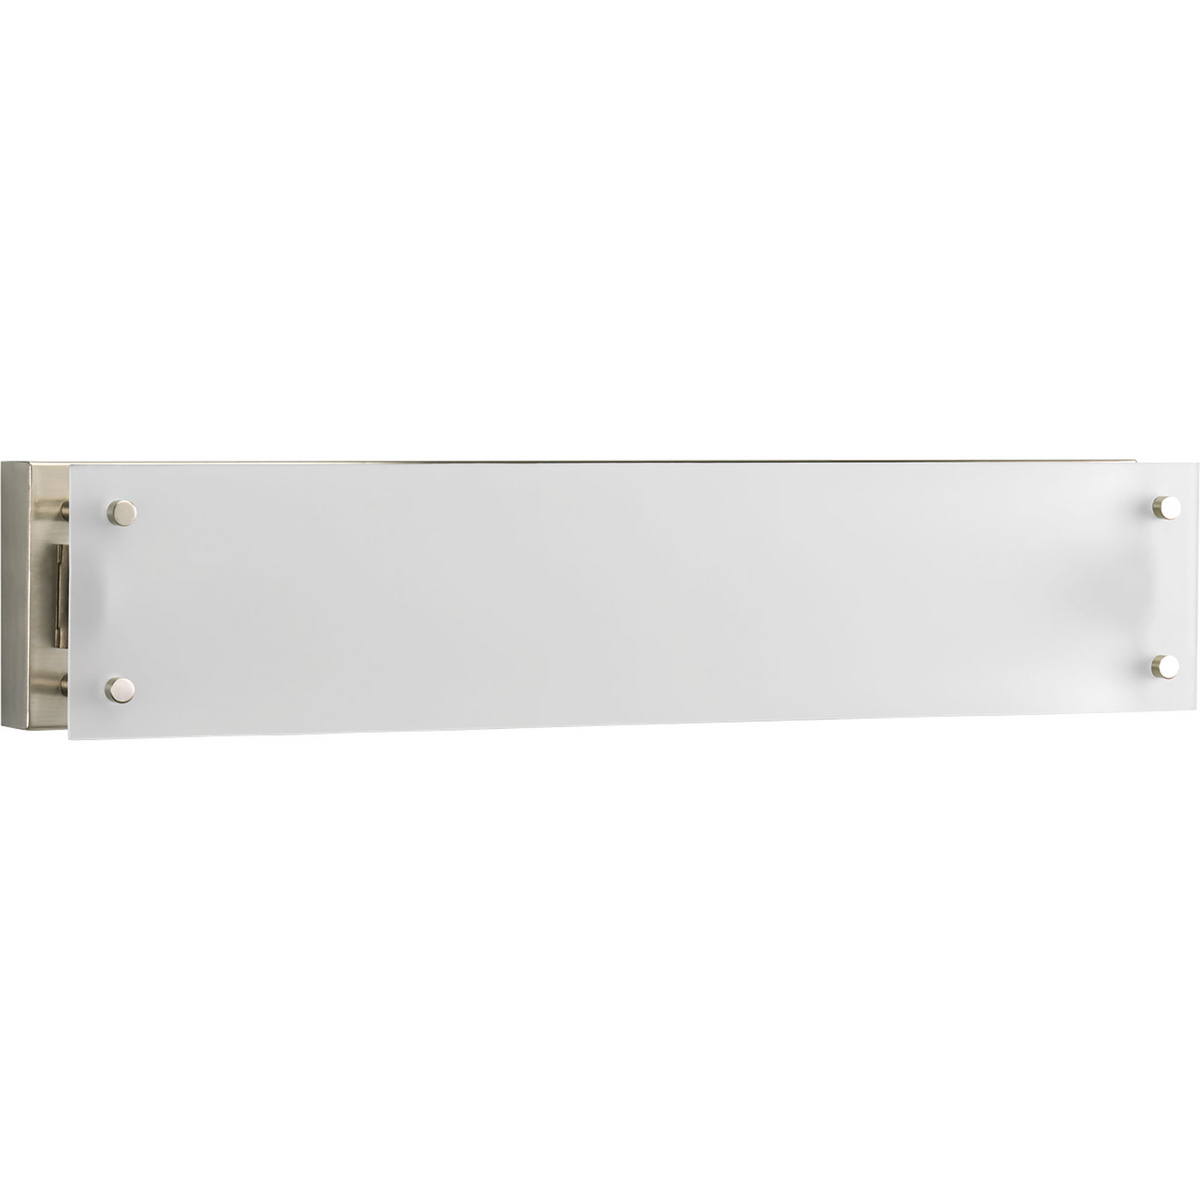 24 in Linear fluorescent Flat Glass Bath Fixture featuring a simple metal frame with an etched glass diffuser. This fixture uses long-life electronic ballast for superior performance and reliability. Damp location listed and California Title-24 compliant.